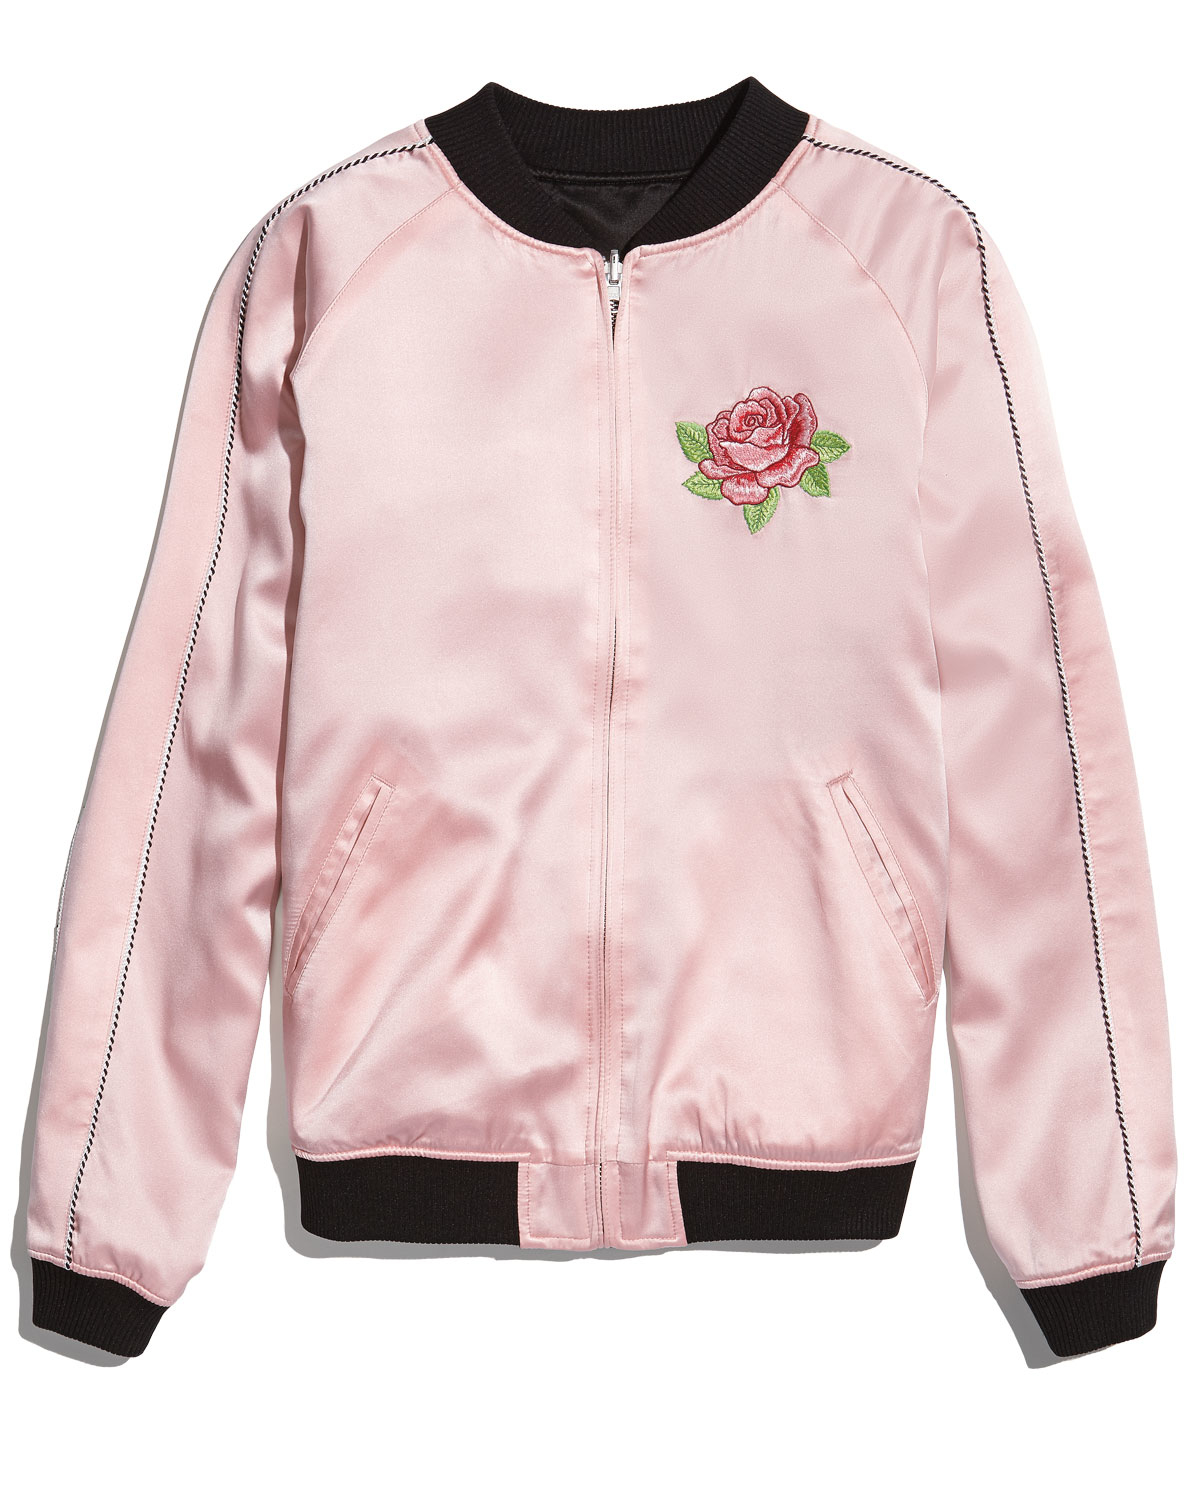 Lyst - Opening Ceremony Reversible Embroidered Silk Varsity Jacket in Pink